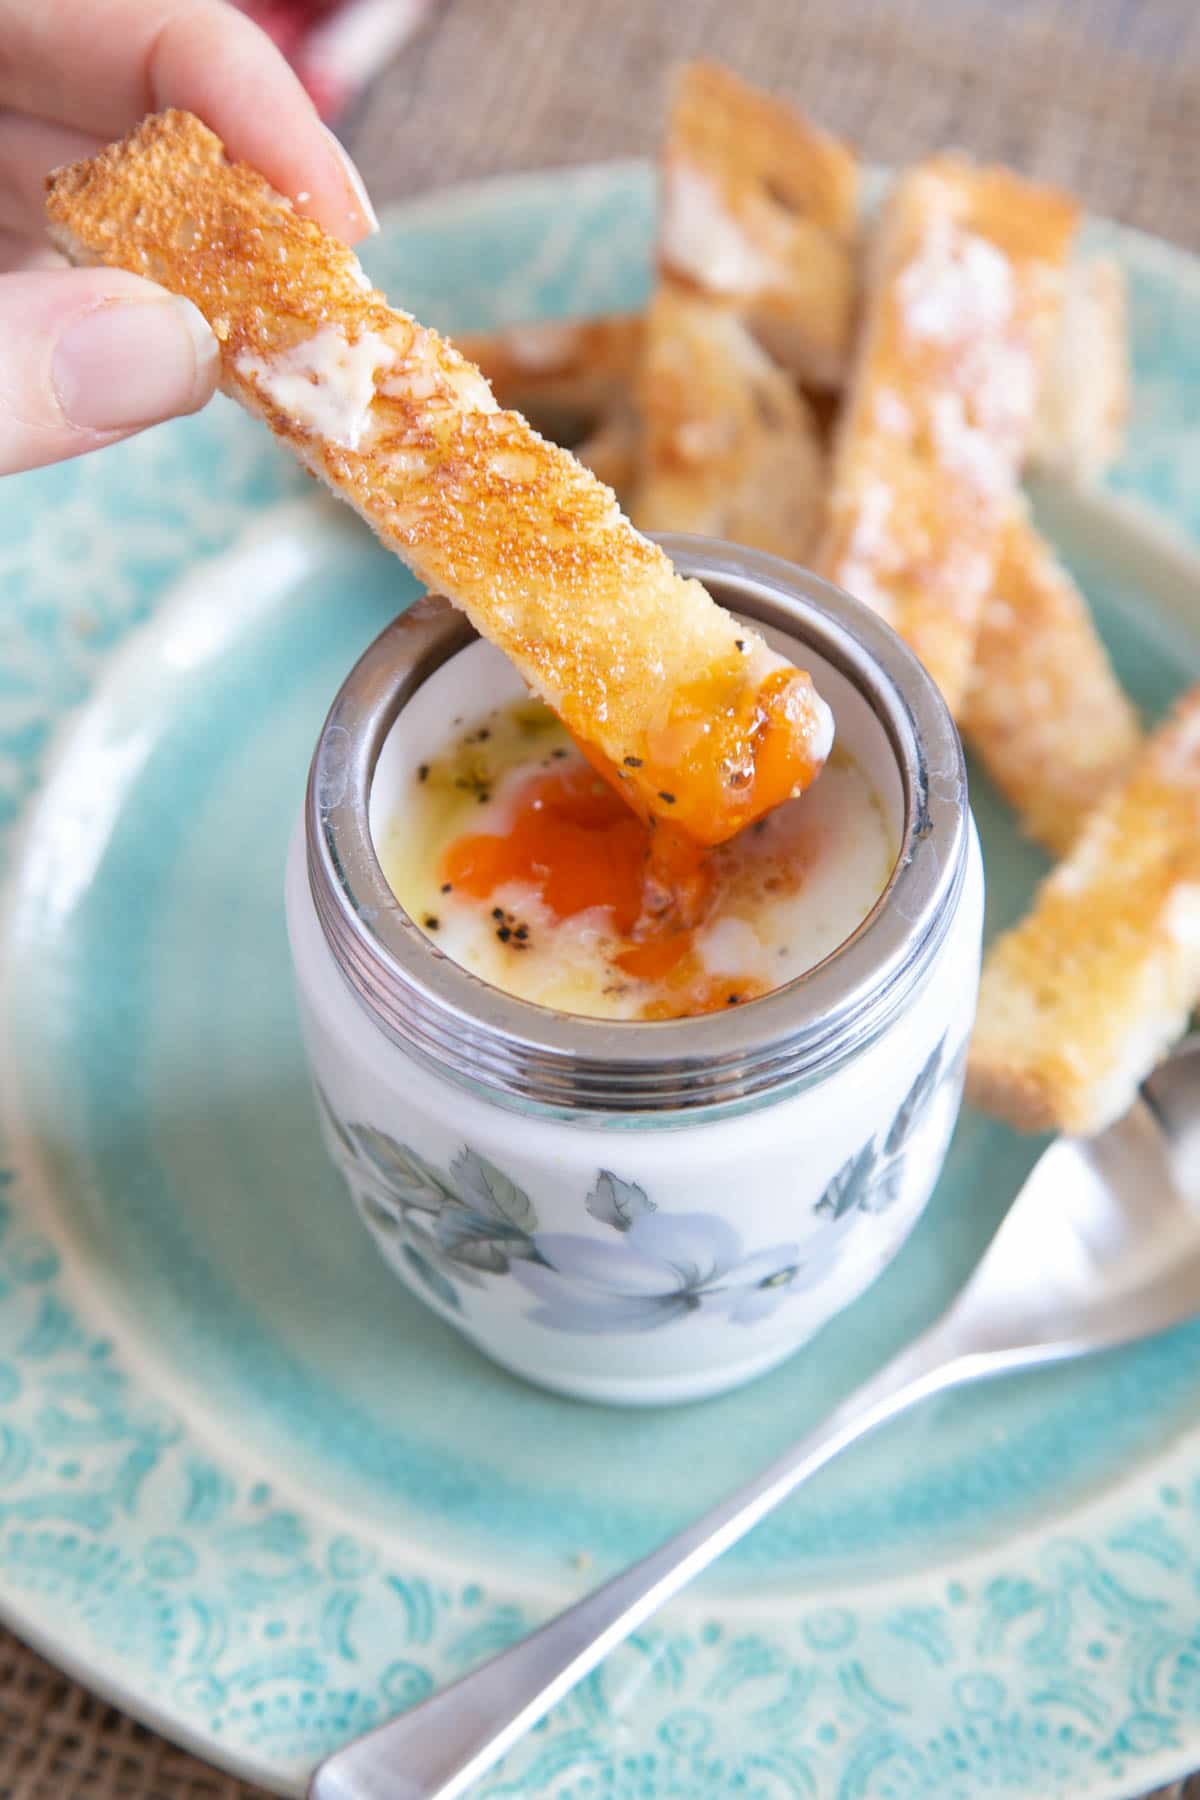 https://fussfreeflavours.com/wp-content/uploads/2022/05/Easy-Coddled-Eggs-Main.jpg